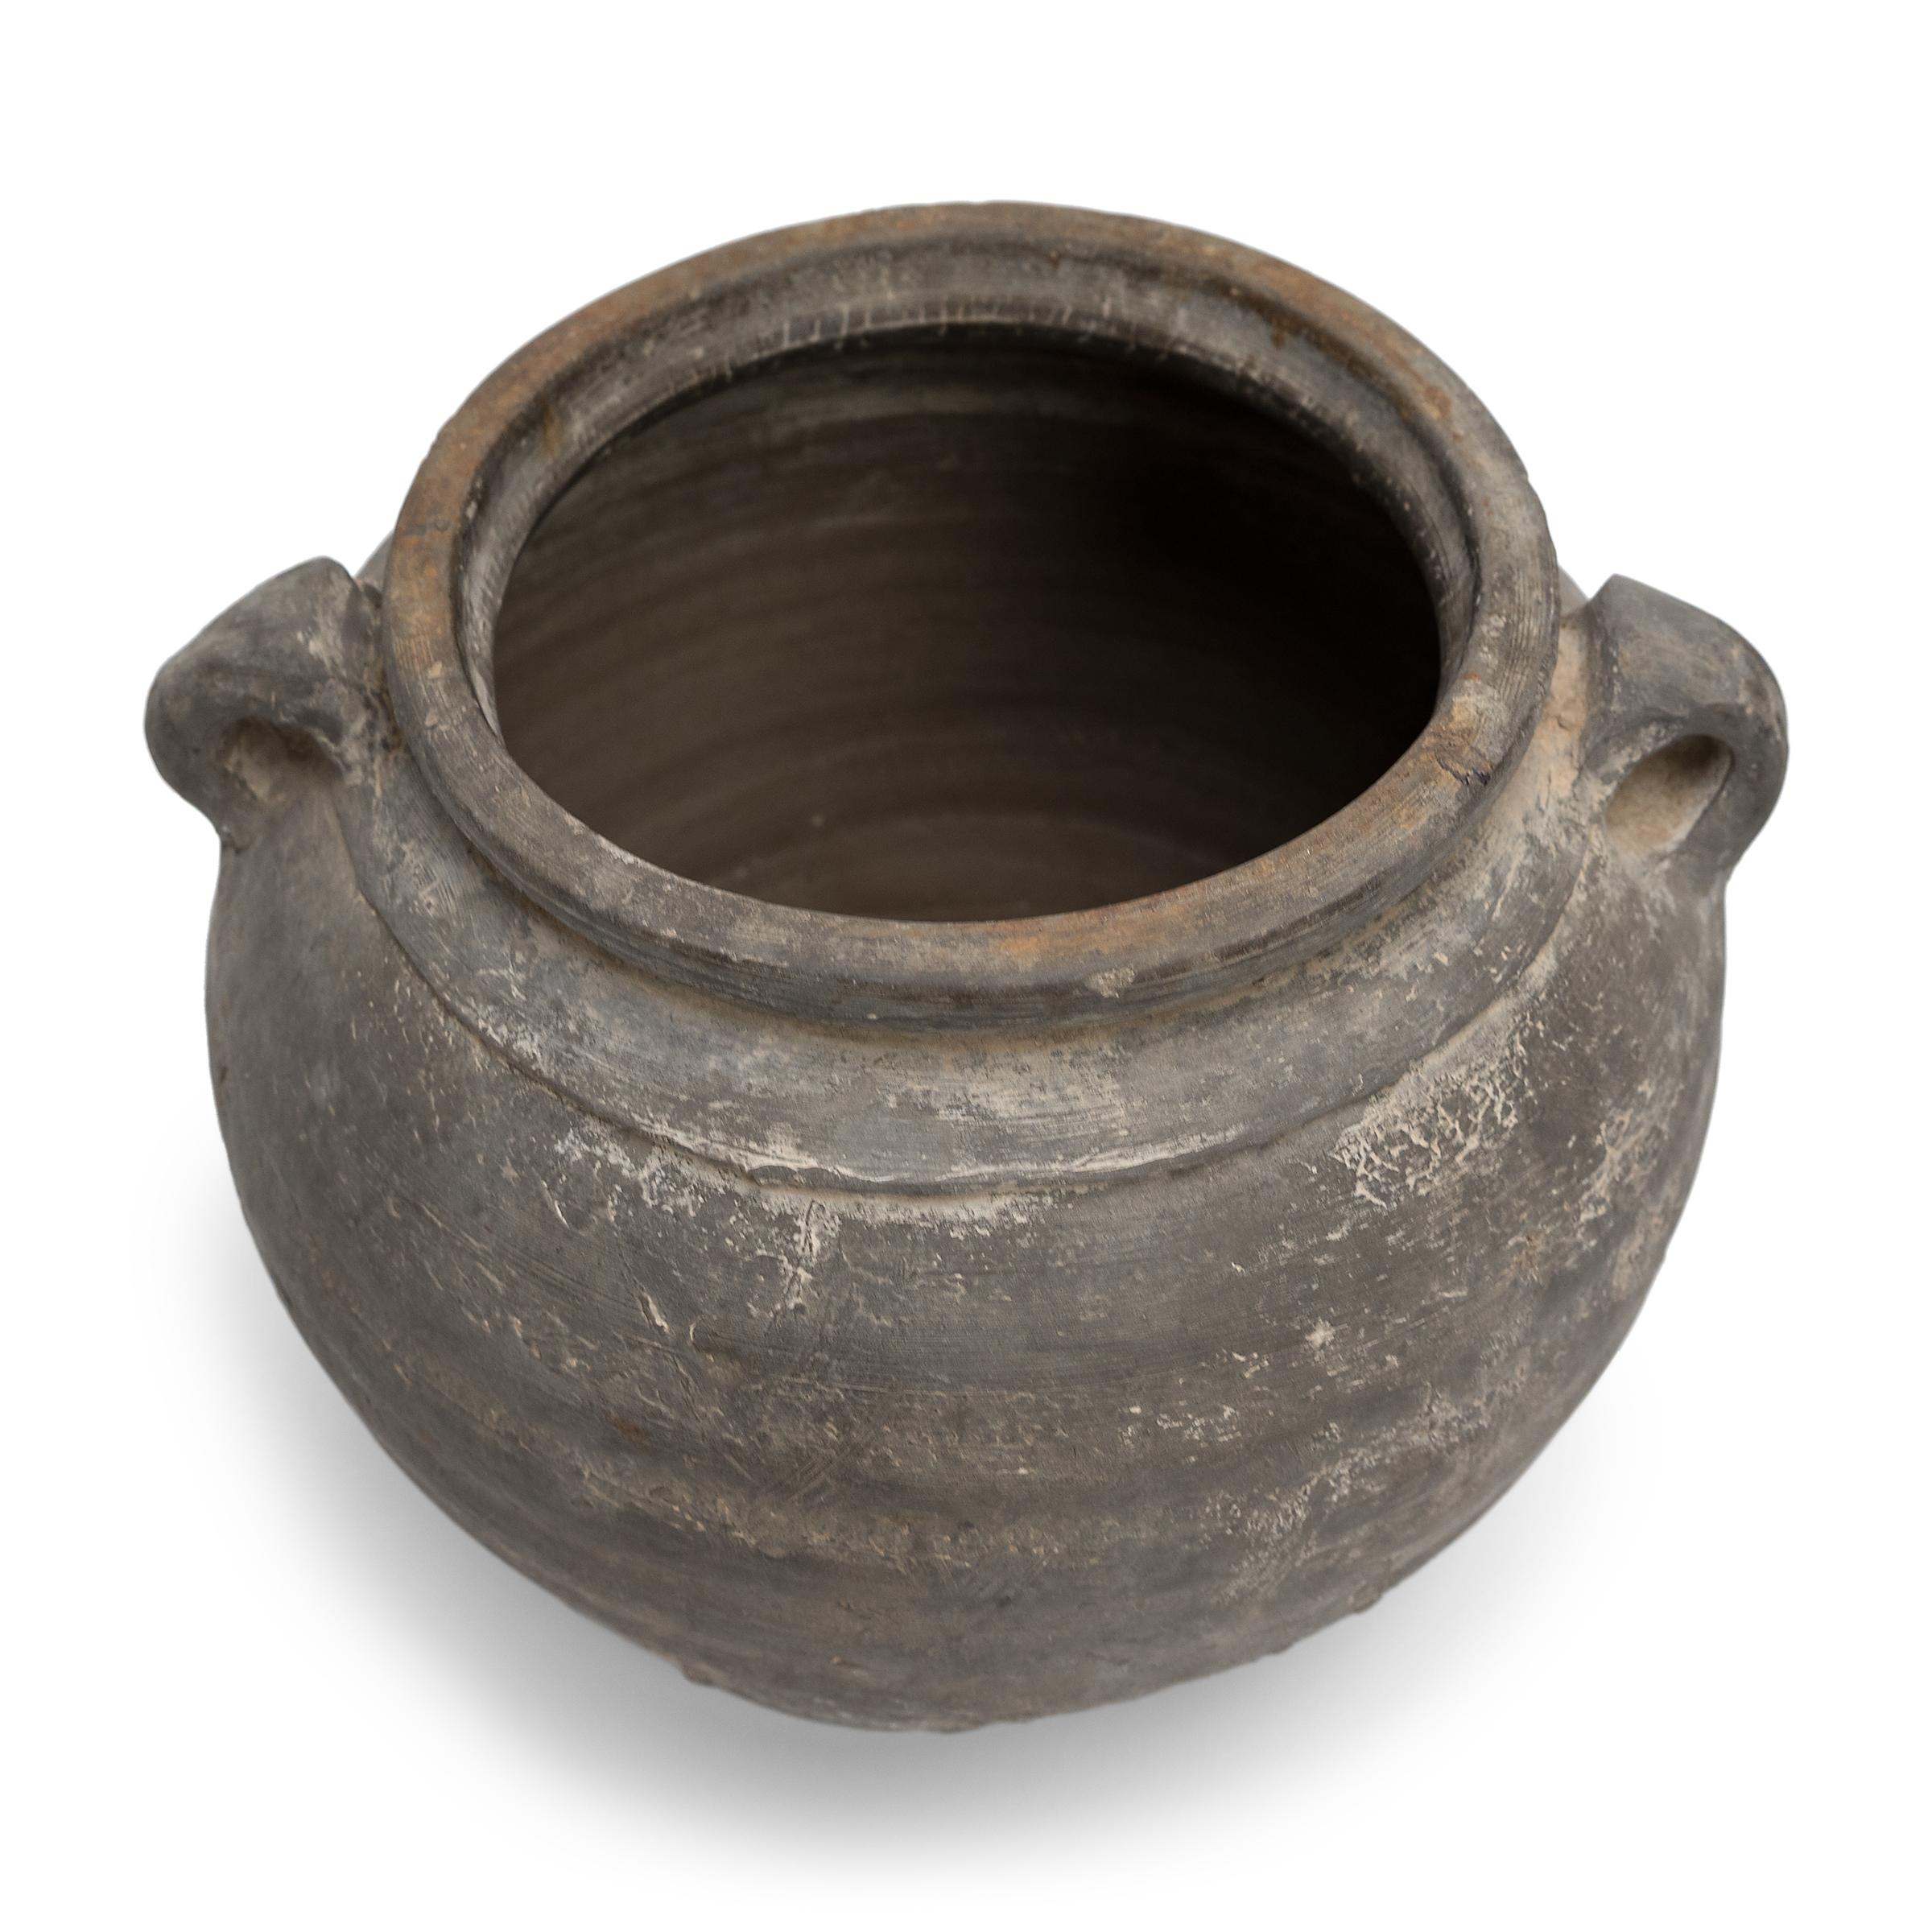 Rustic Chinese Lobed Pantry Vessel, c. 1900